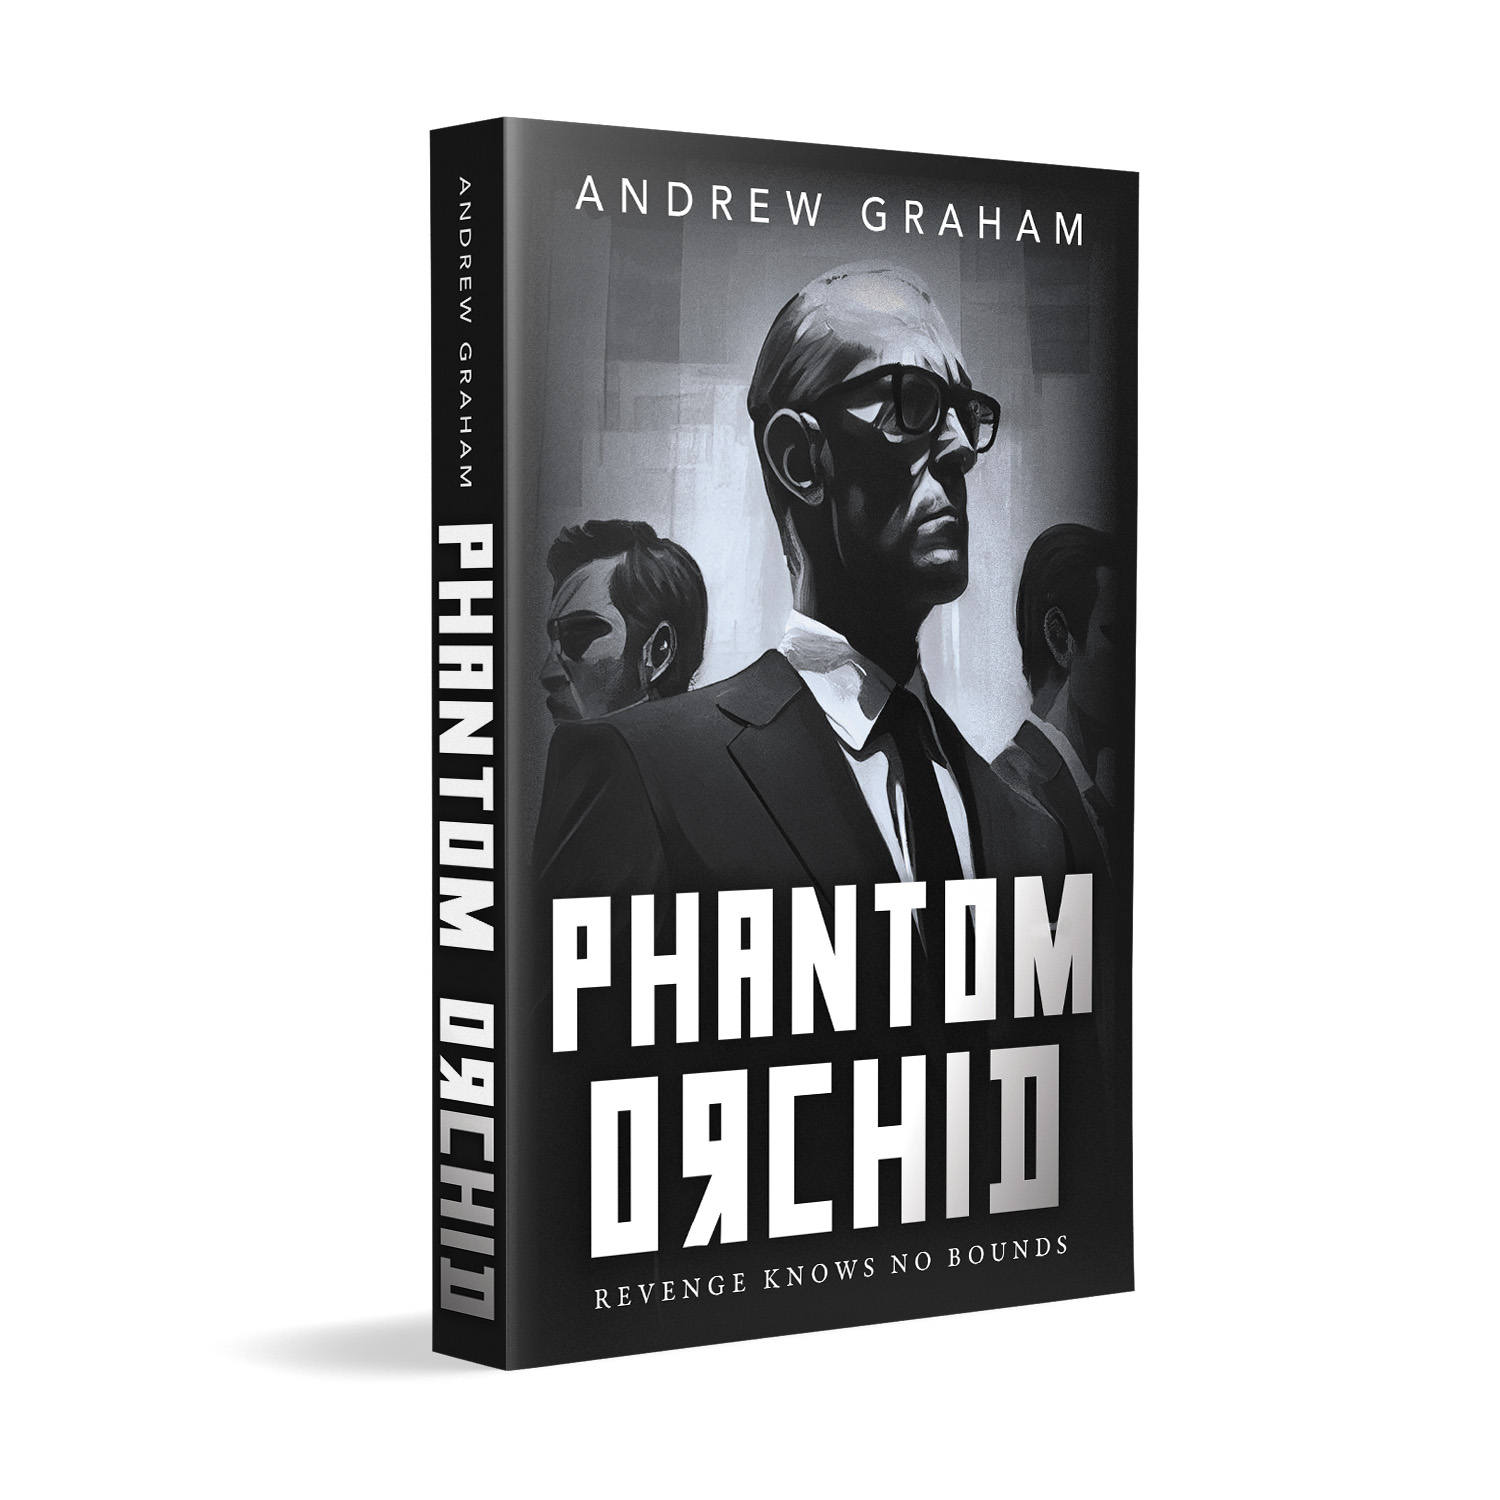 'Phantom Orchid' is a dark and twisting geopolitical thriller, featuring rich characters playing for the highest of stakes. The author is Andrew Graham. The book cover design is by Mark Thomas. To learn more about what Mark could do for your book, please visit coverness.com.